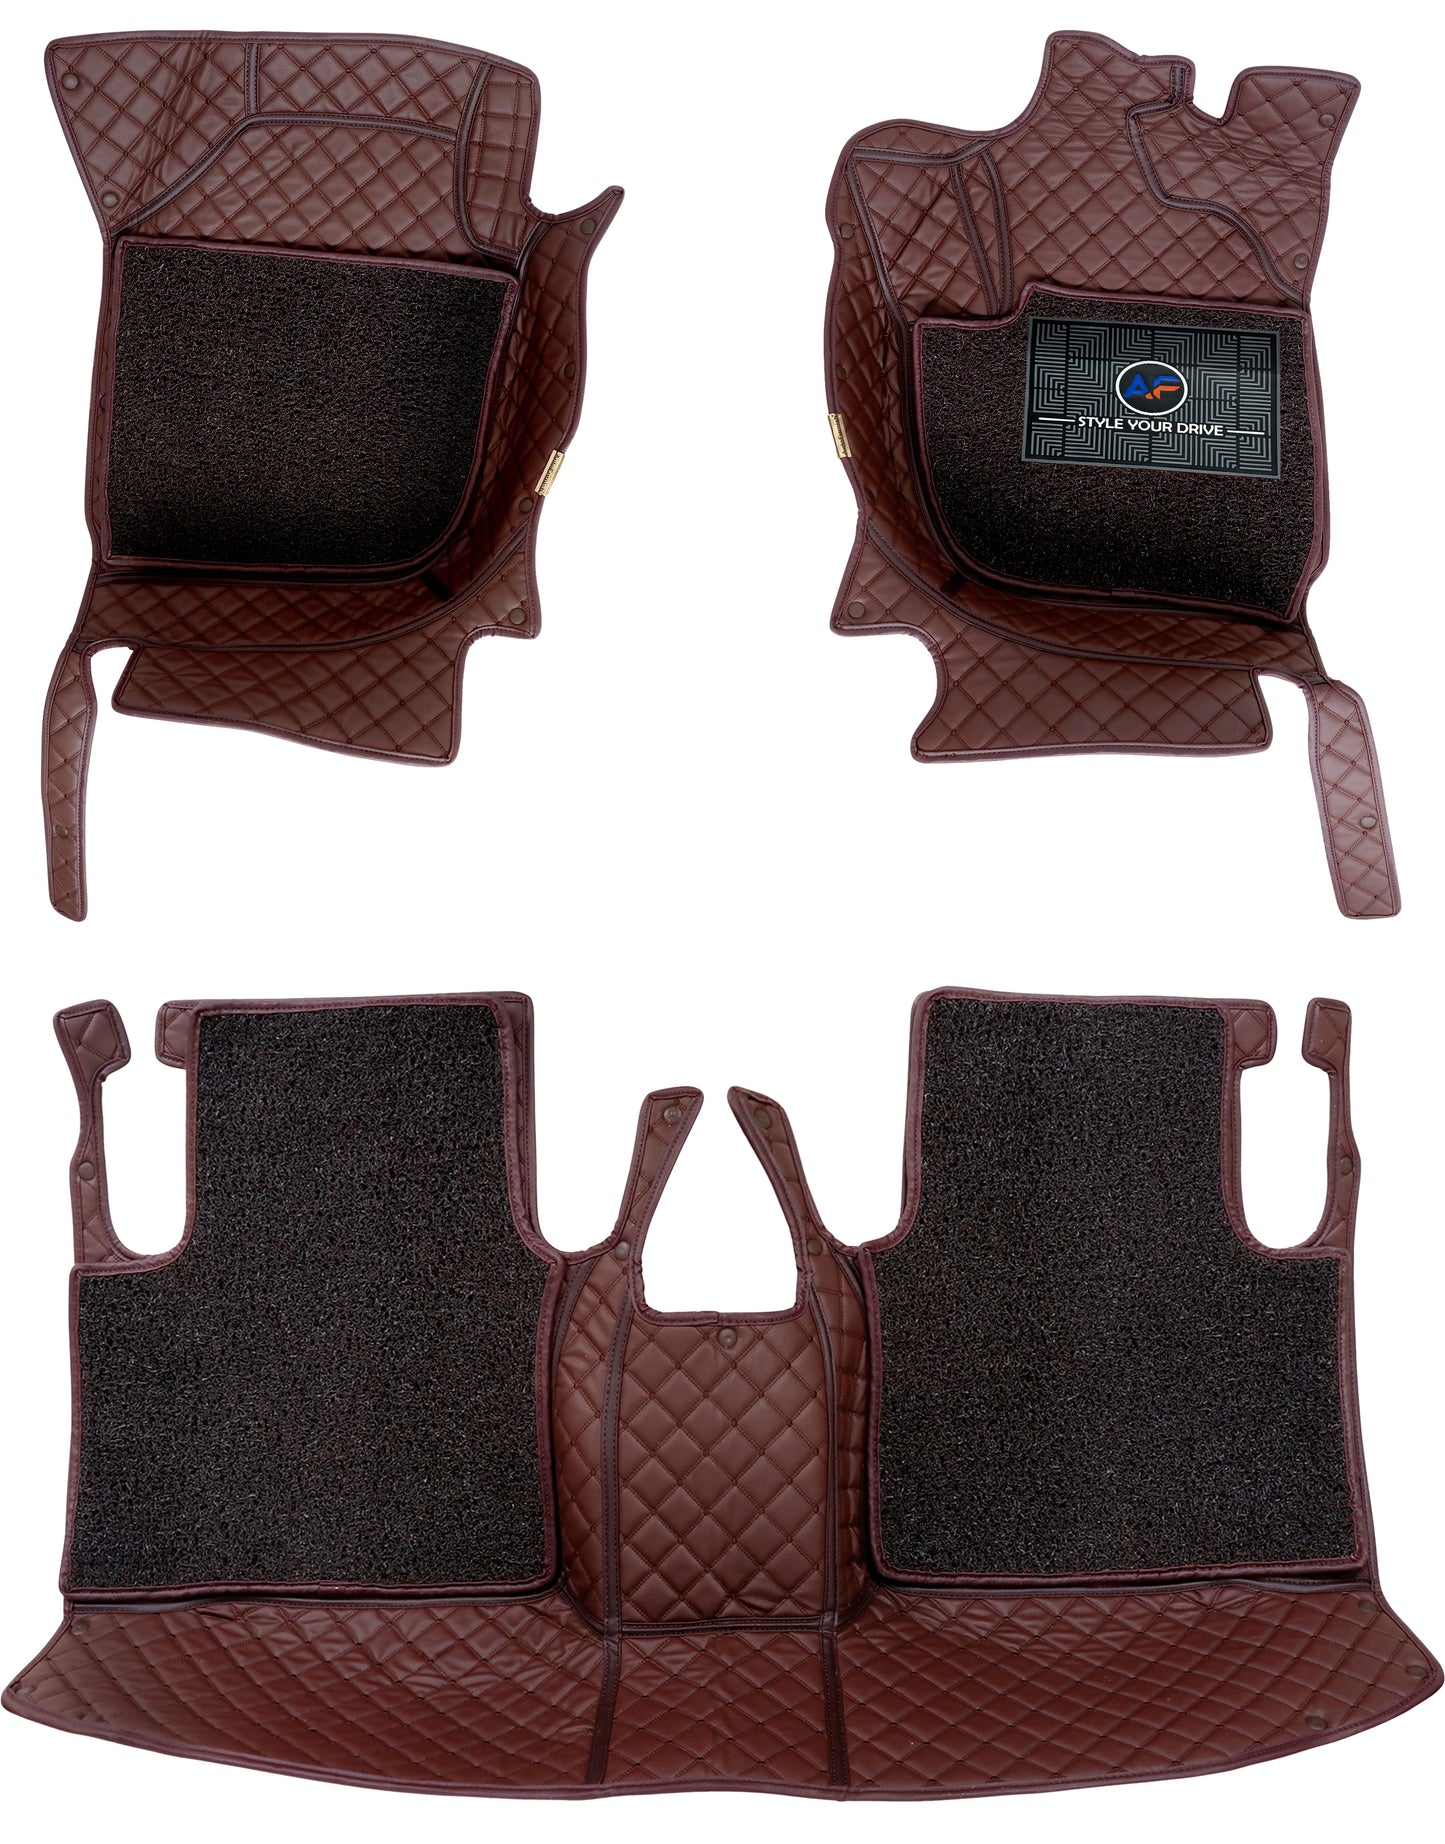 Mahindra Scorpio (Captain Seats)2014-18-7D Luxury Car Mat, All Weather Proof, Anti-Skid, 100% Waterproof & Odorless with Unique Diamond Fish Design (24mm Luxury PU Leather, 2 Rows)